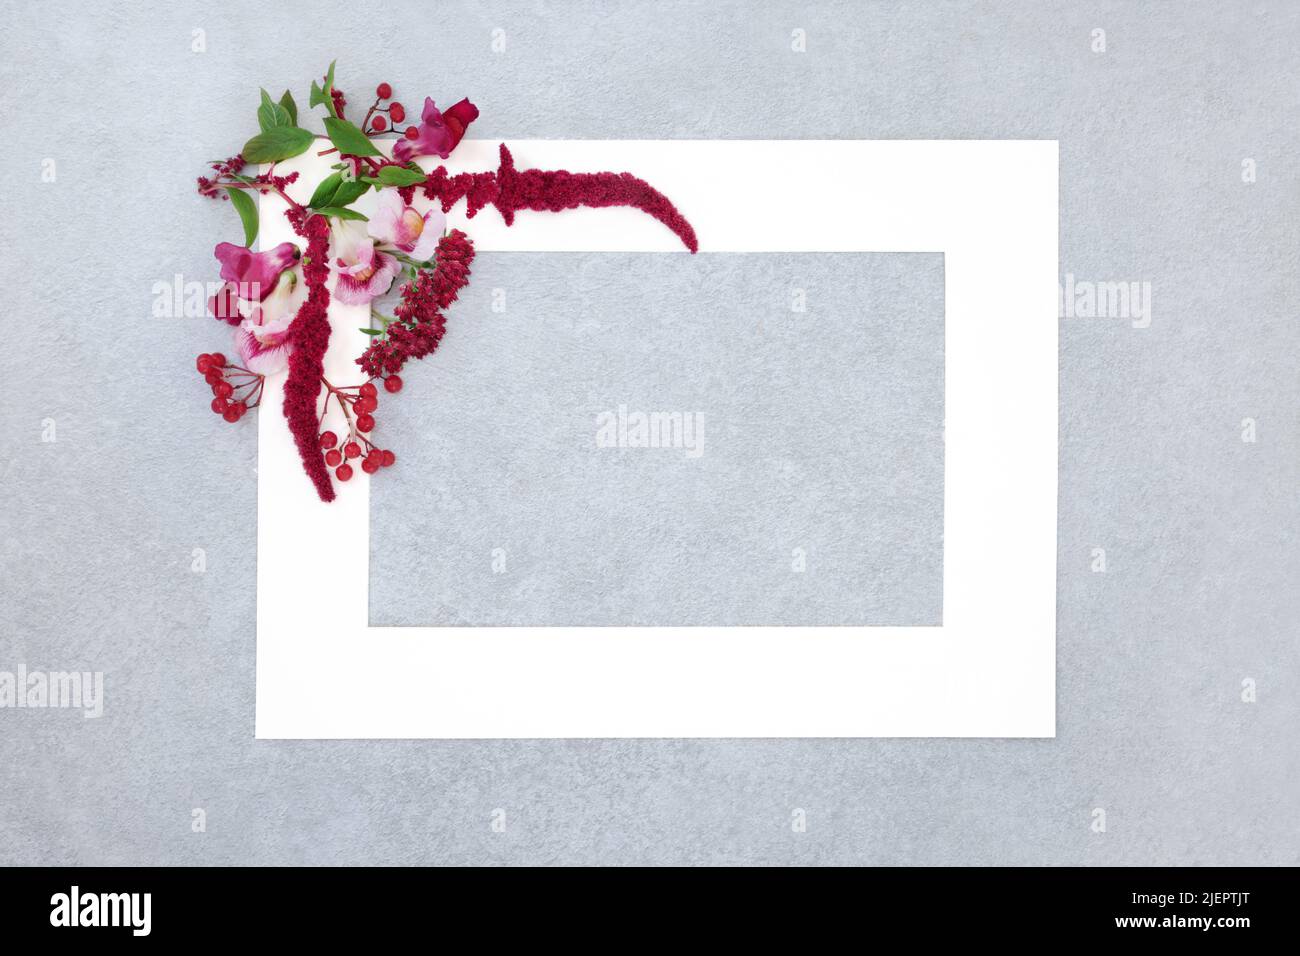 Autumn and Thanksgiving floral background frame with amaranthus flowers, antirrhinum, redcurrant berries. Minimal border floral composition. Stock Photo